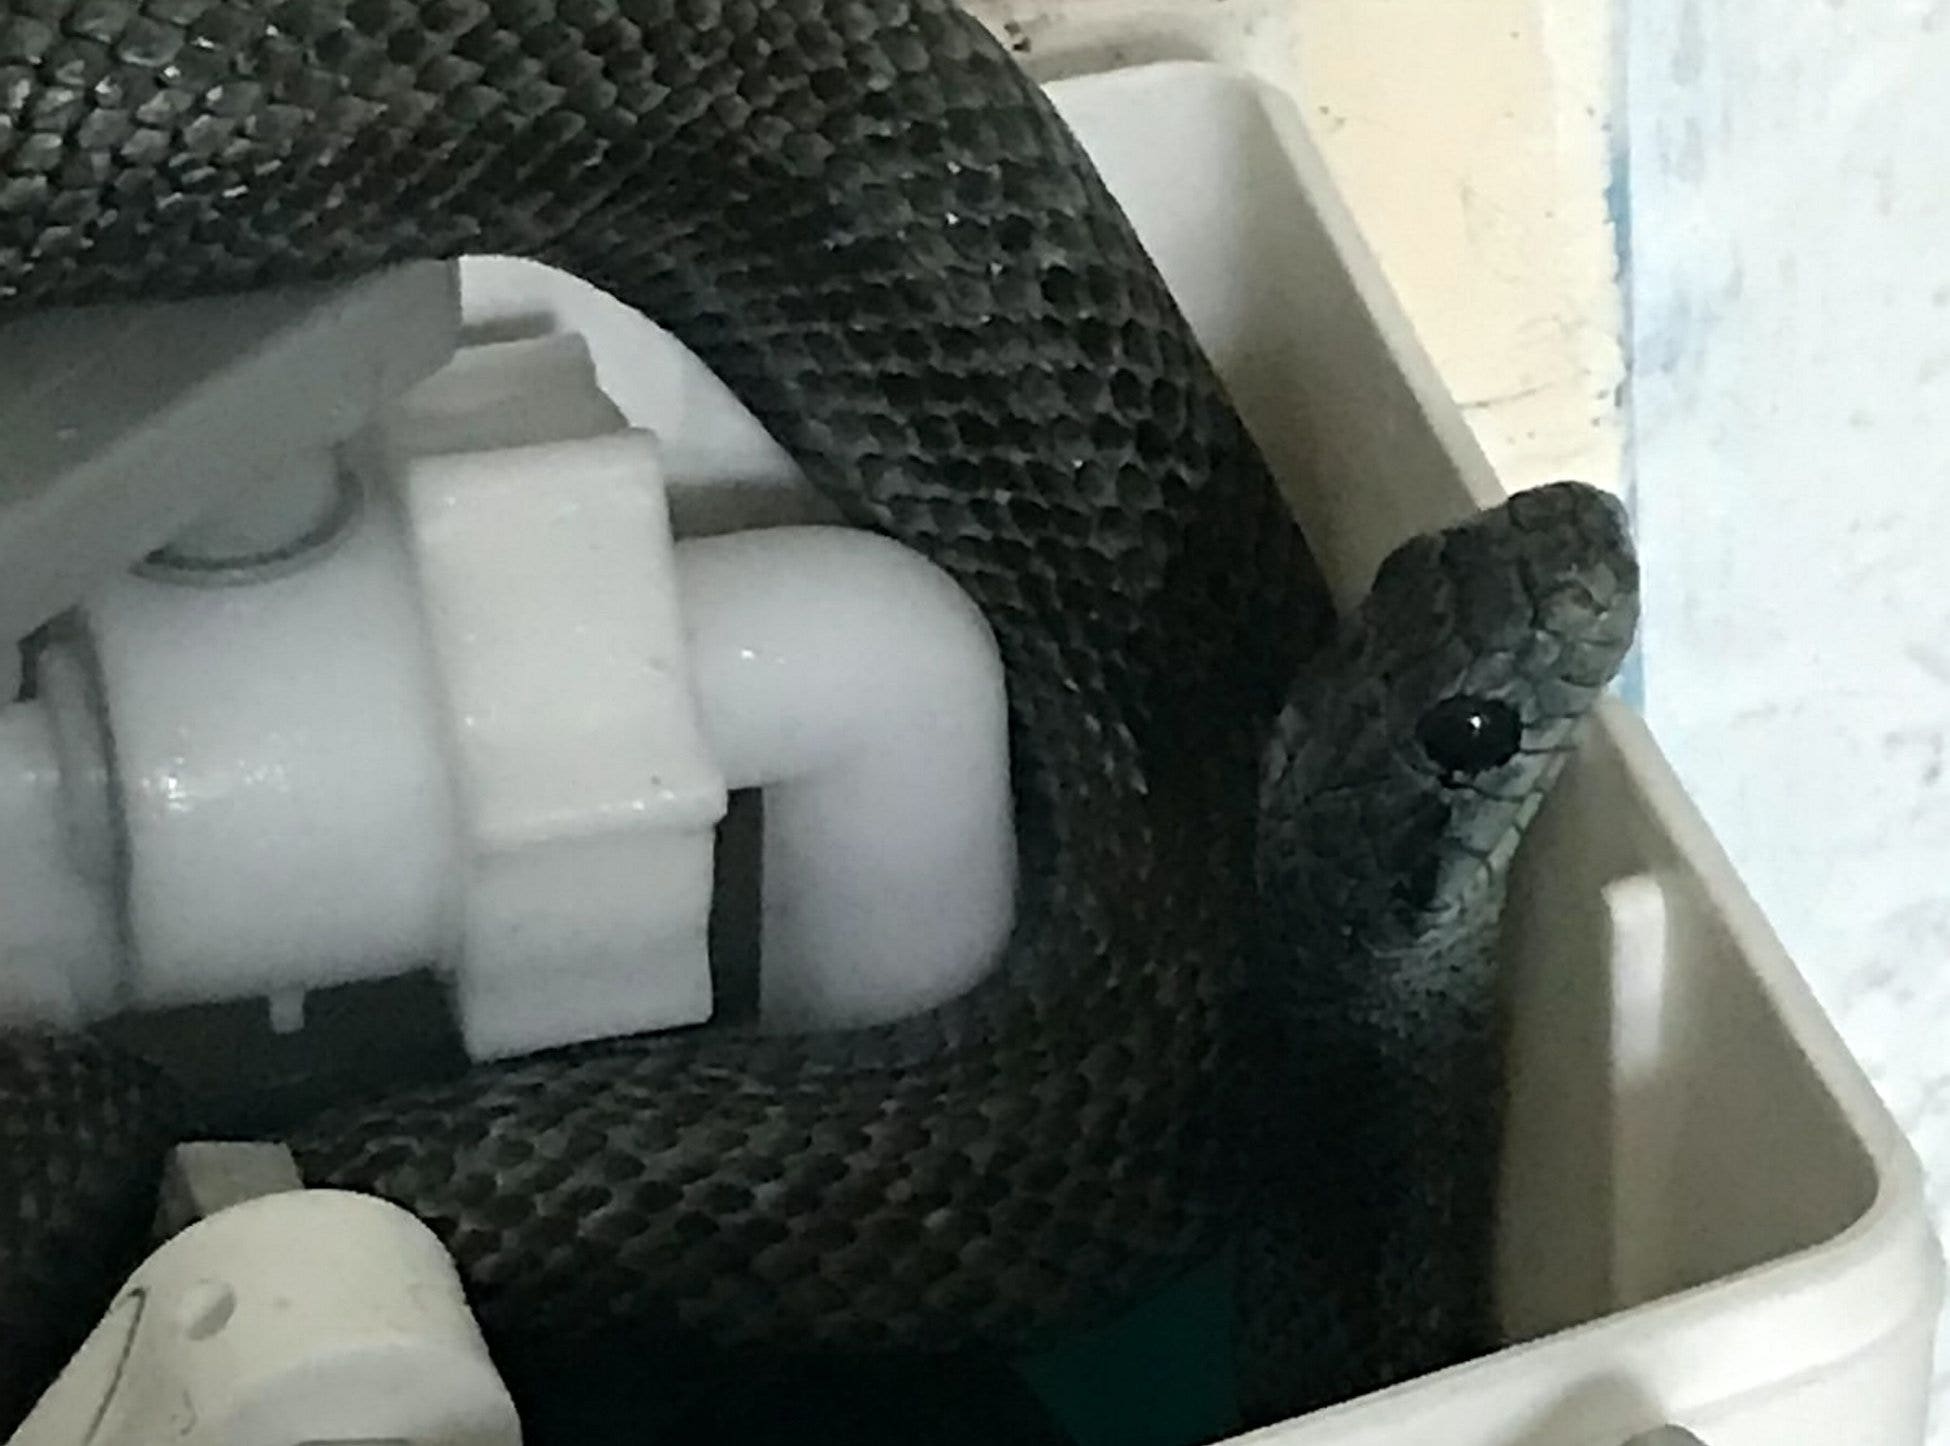 Couple shocked to find massive snake living in their toilet